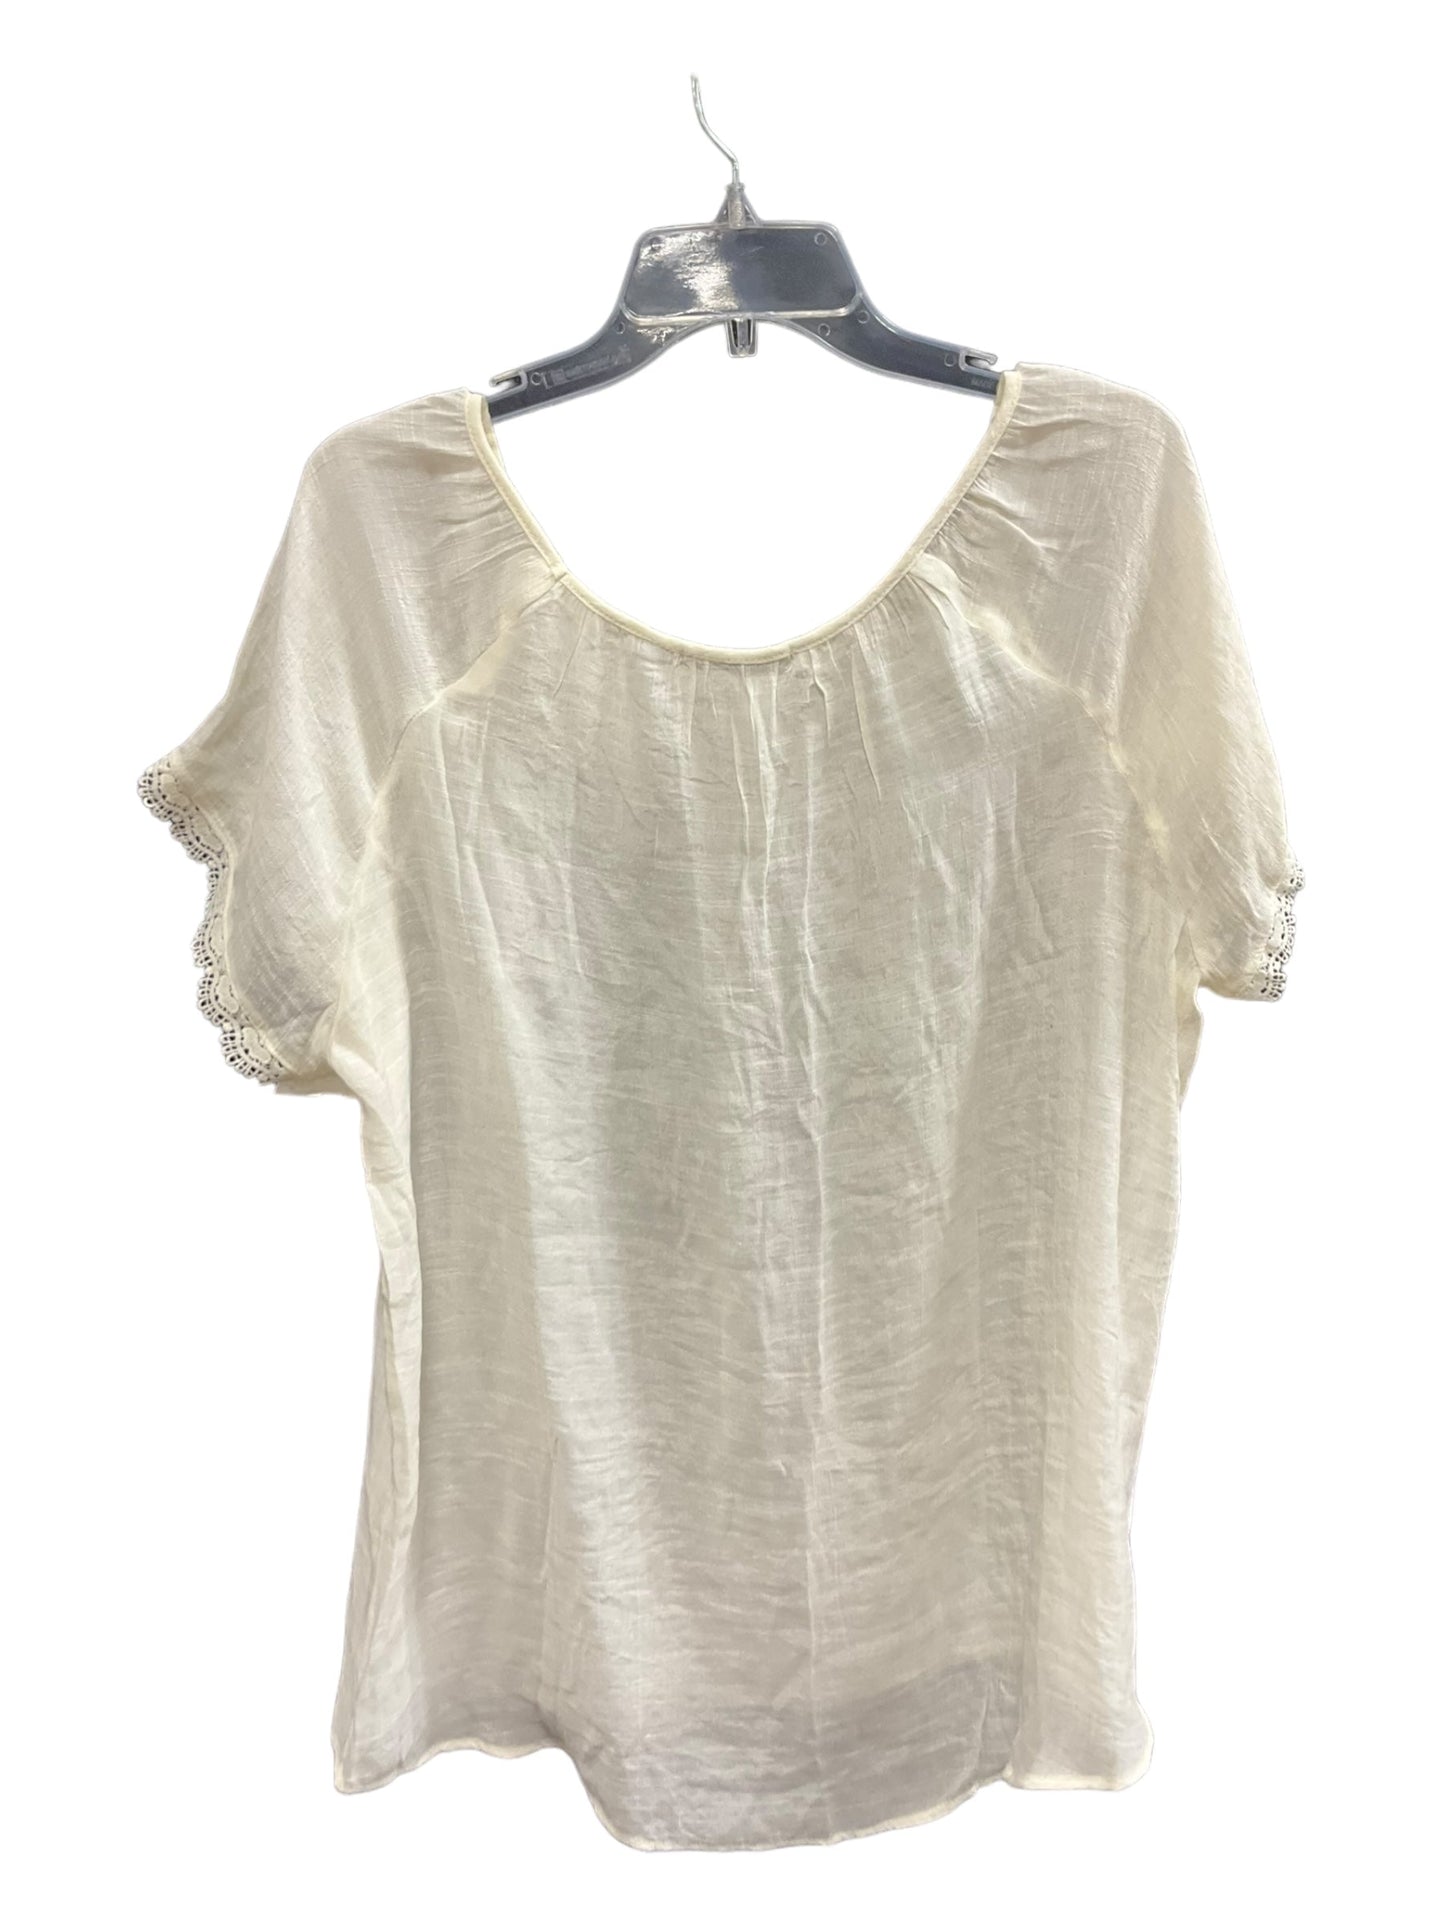 Ivory Top Short Sleeve Notations, Size 1x